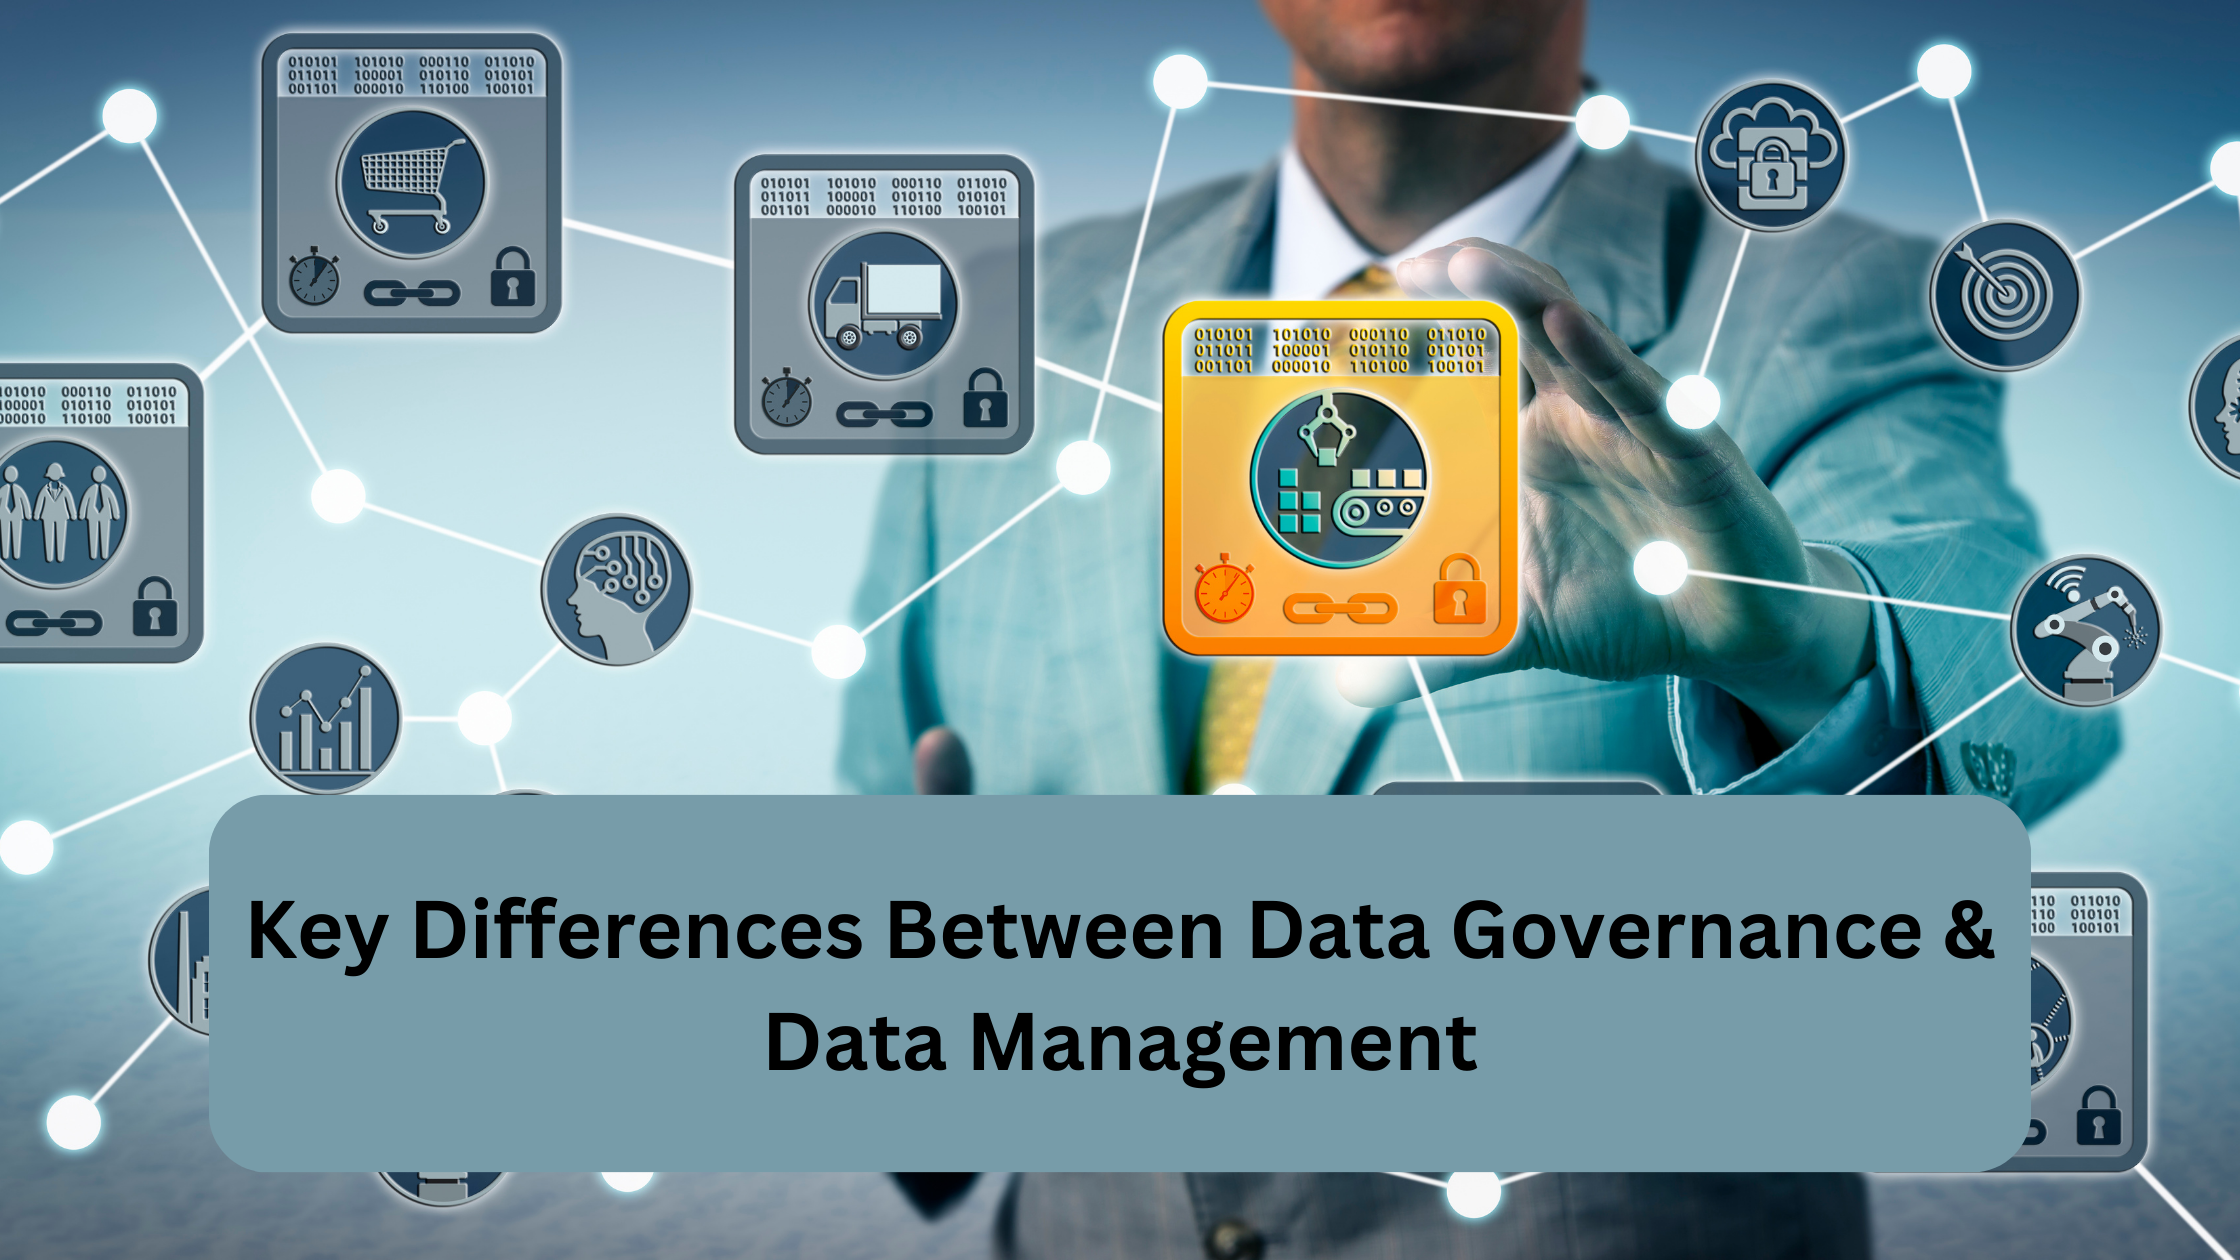 Key Differences Between Data Governance & Data Management